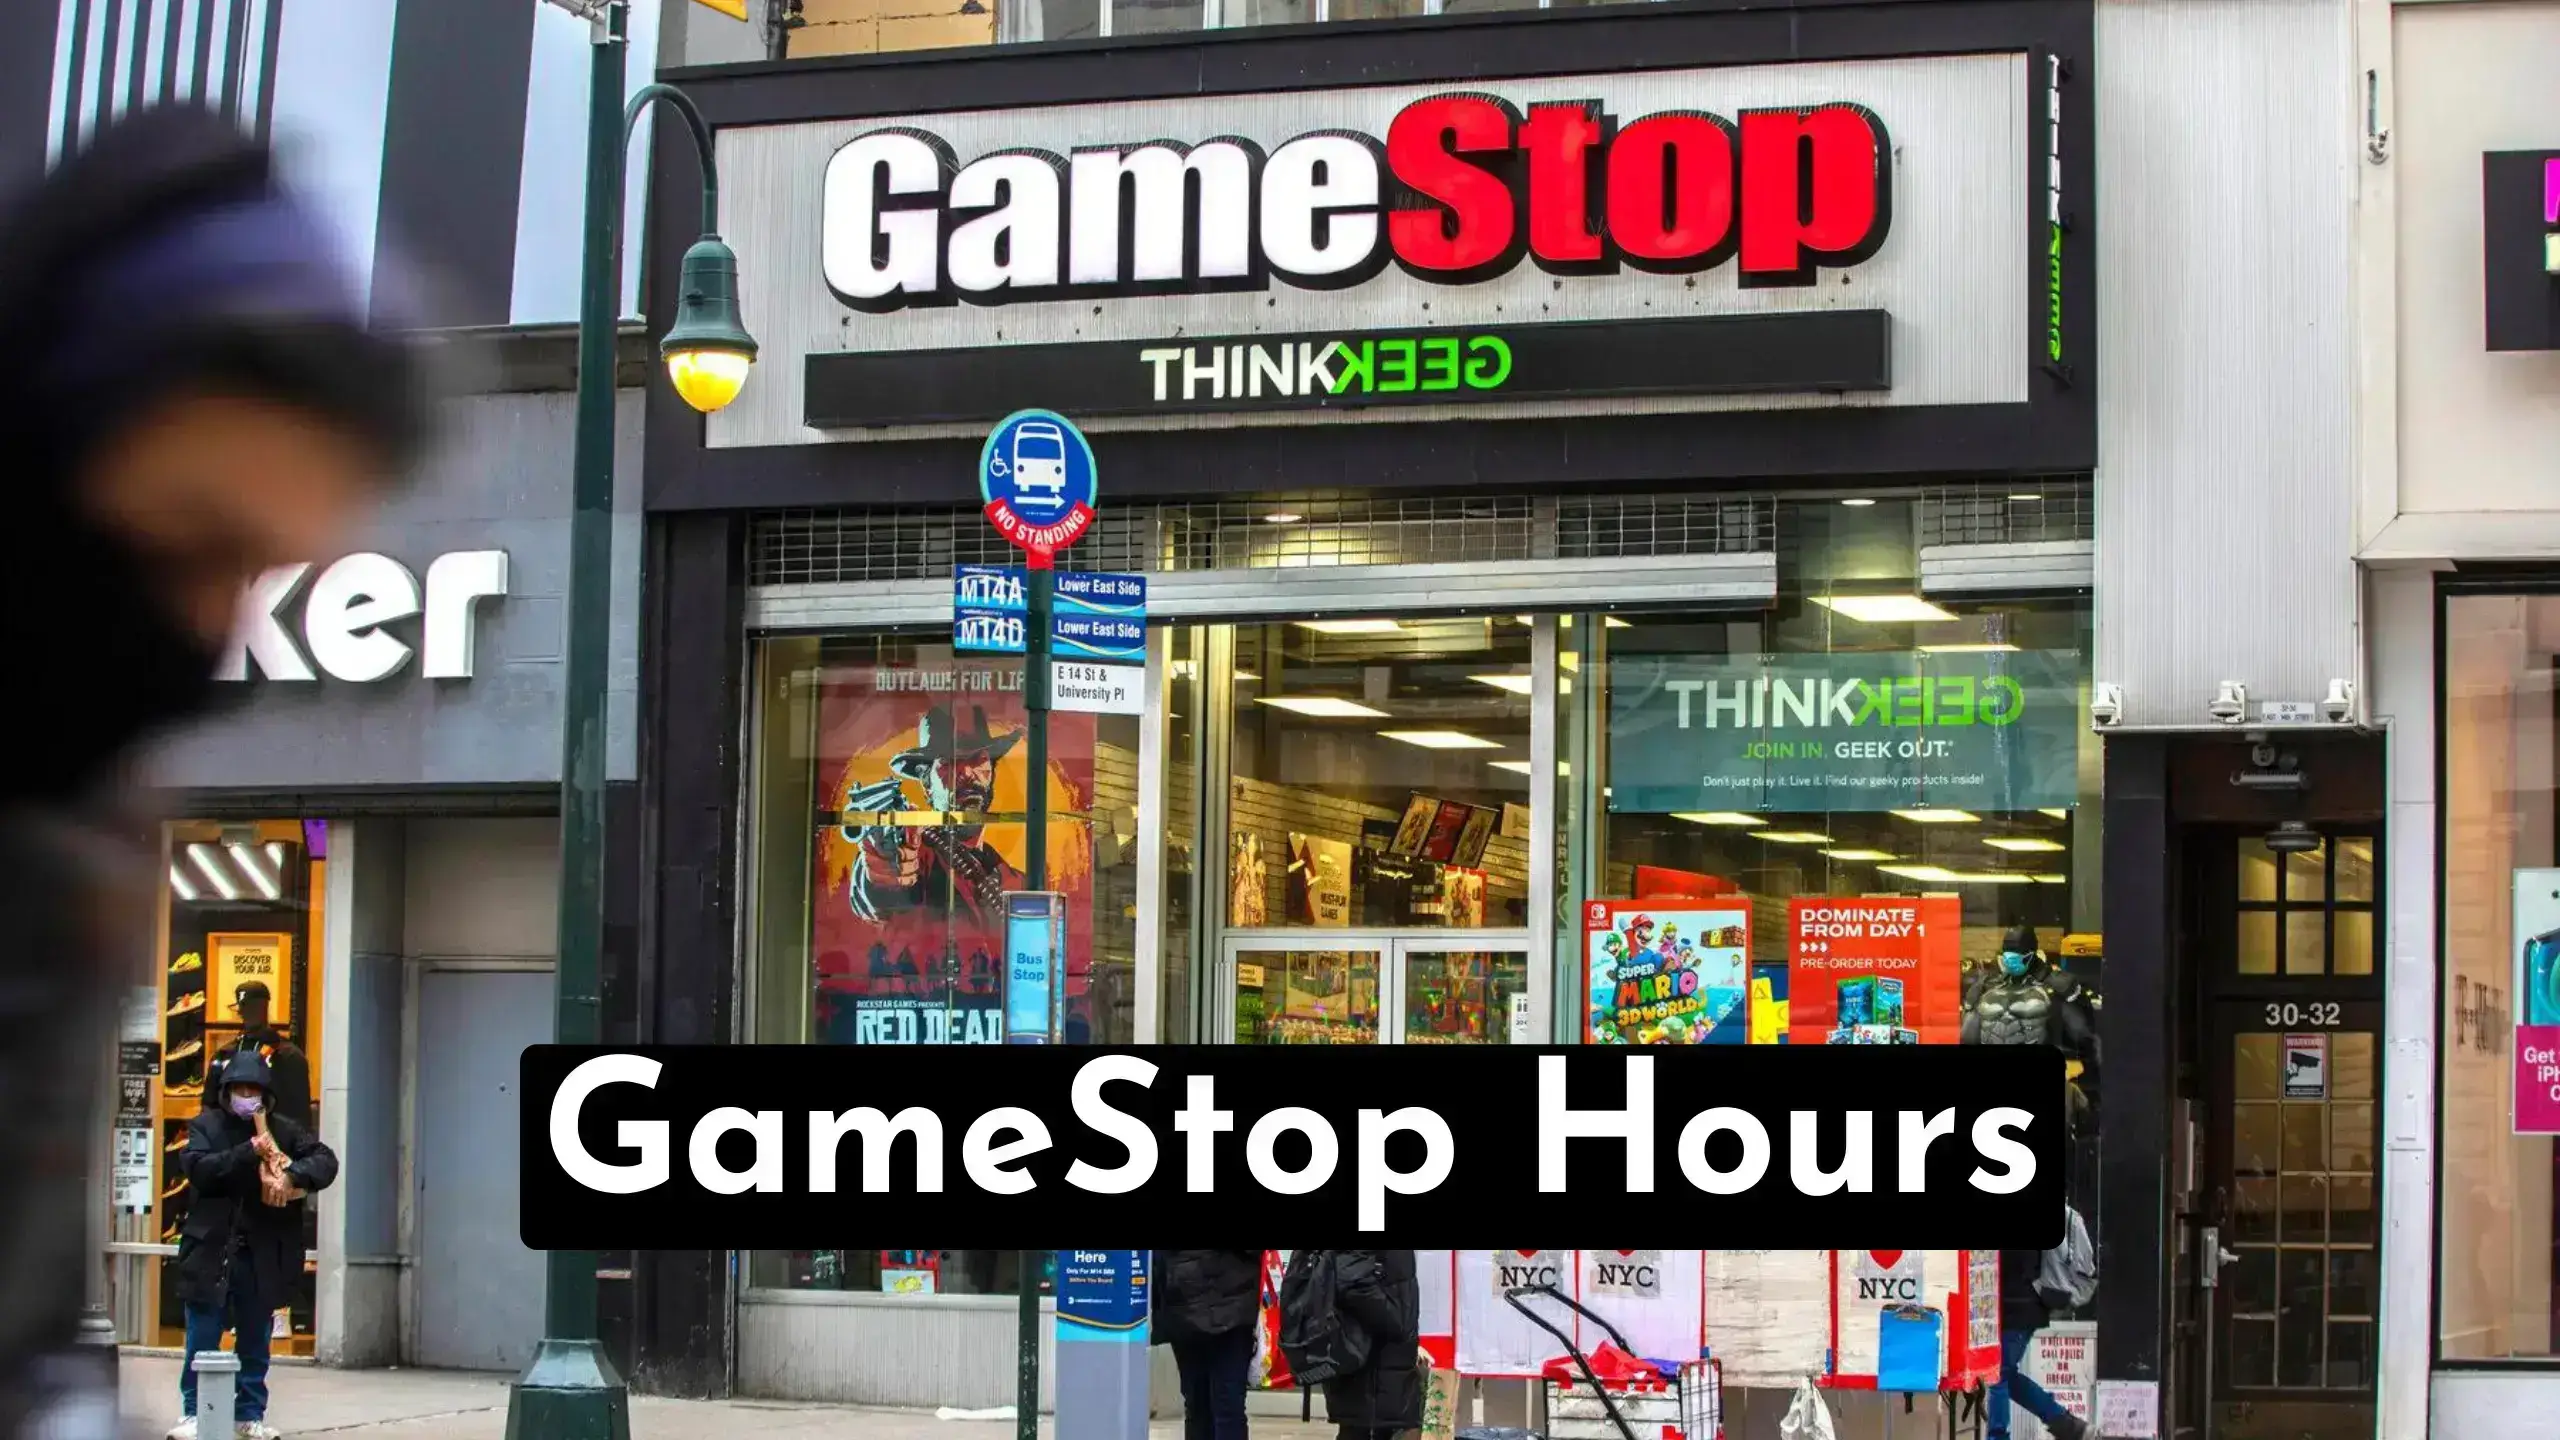 Discover Gamestop hours for gaming excitement! Check out their opening and closing times to level up your shopping experience.